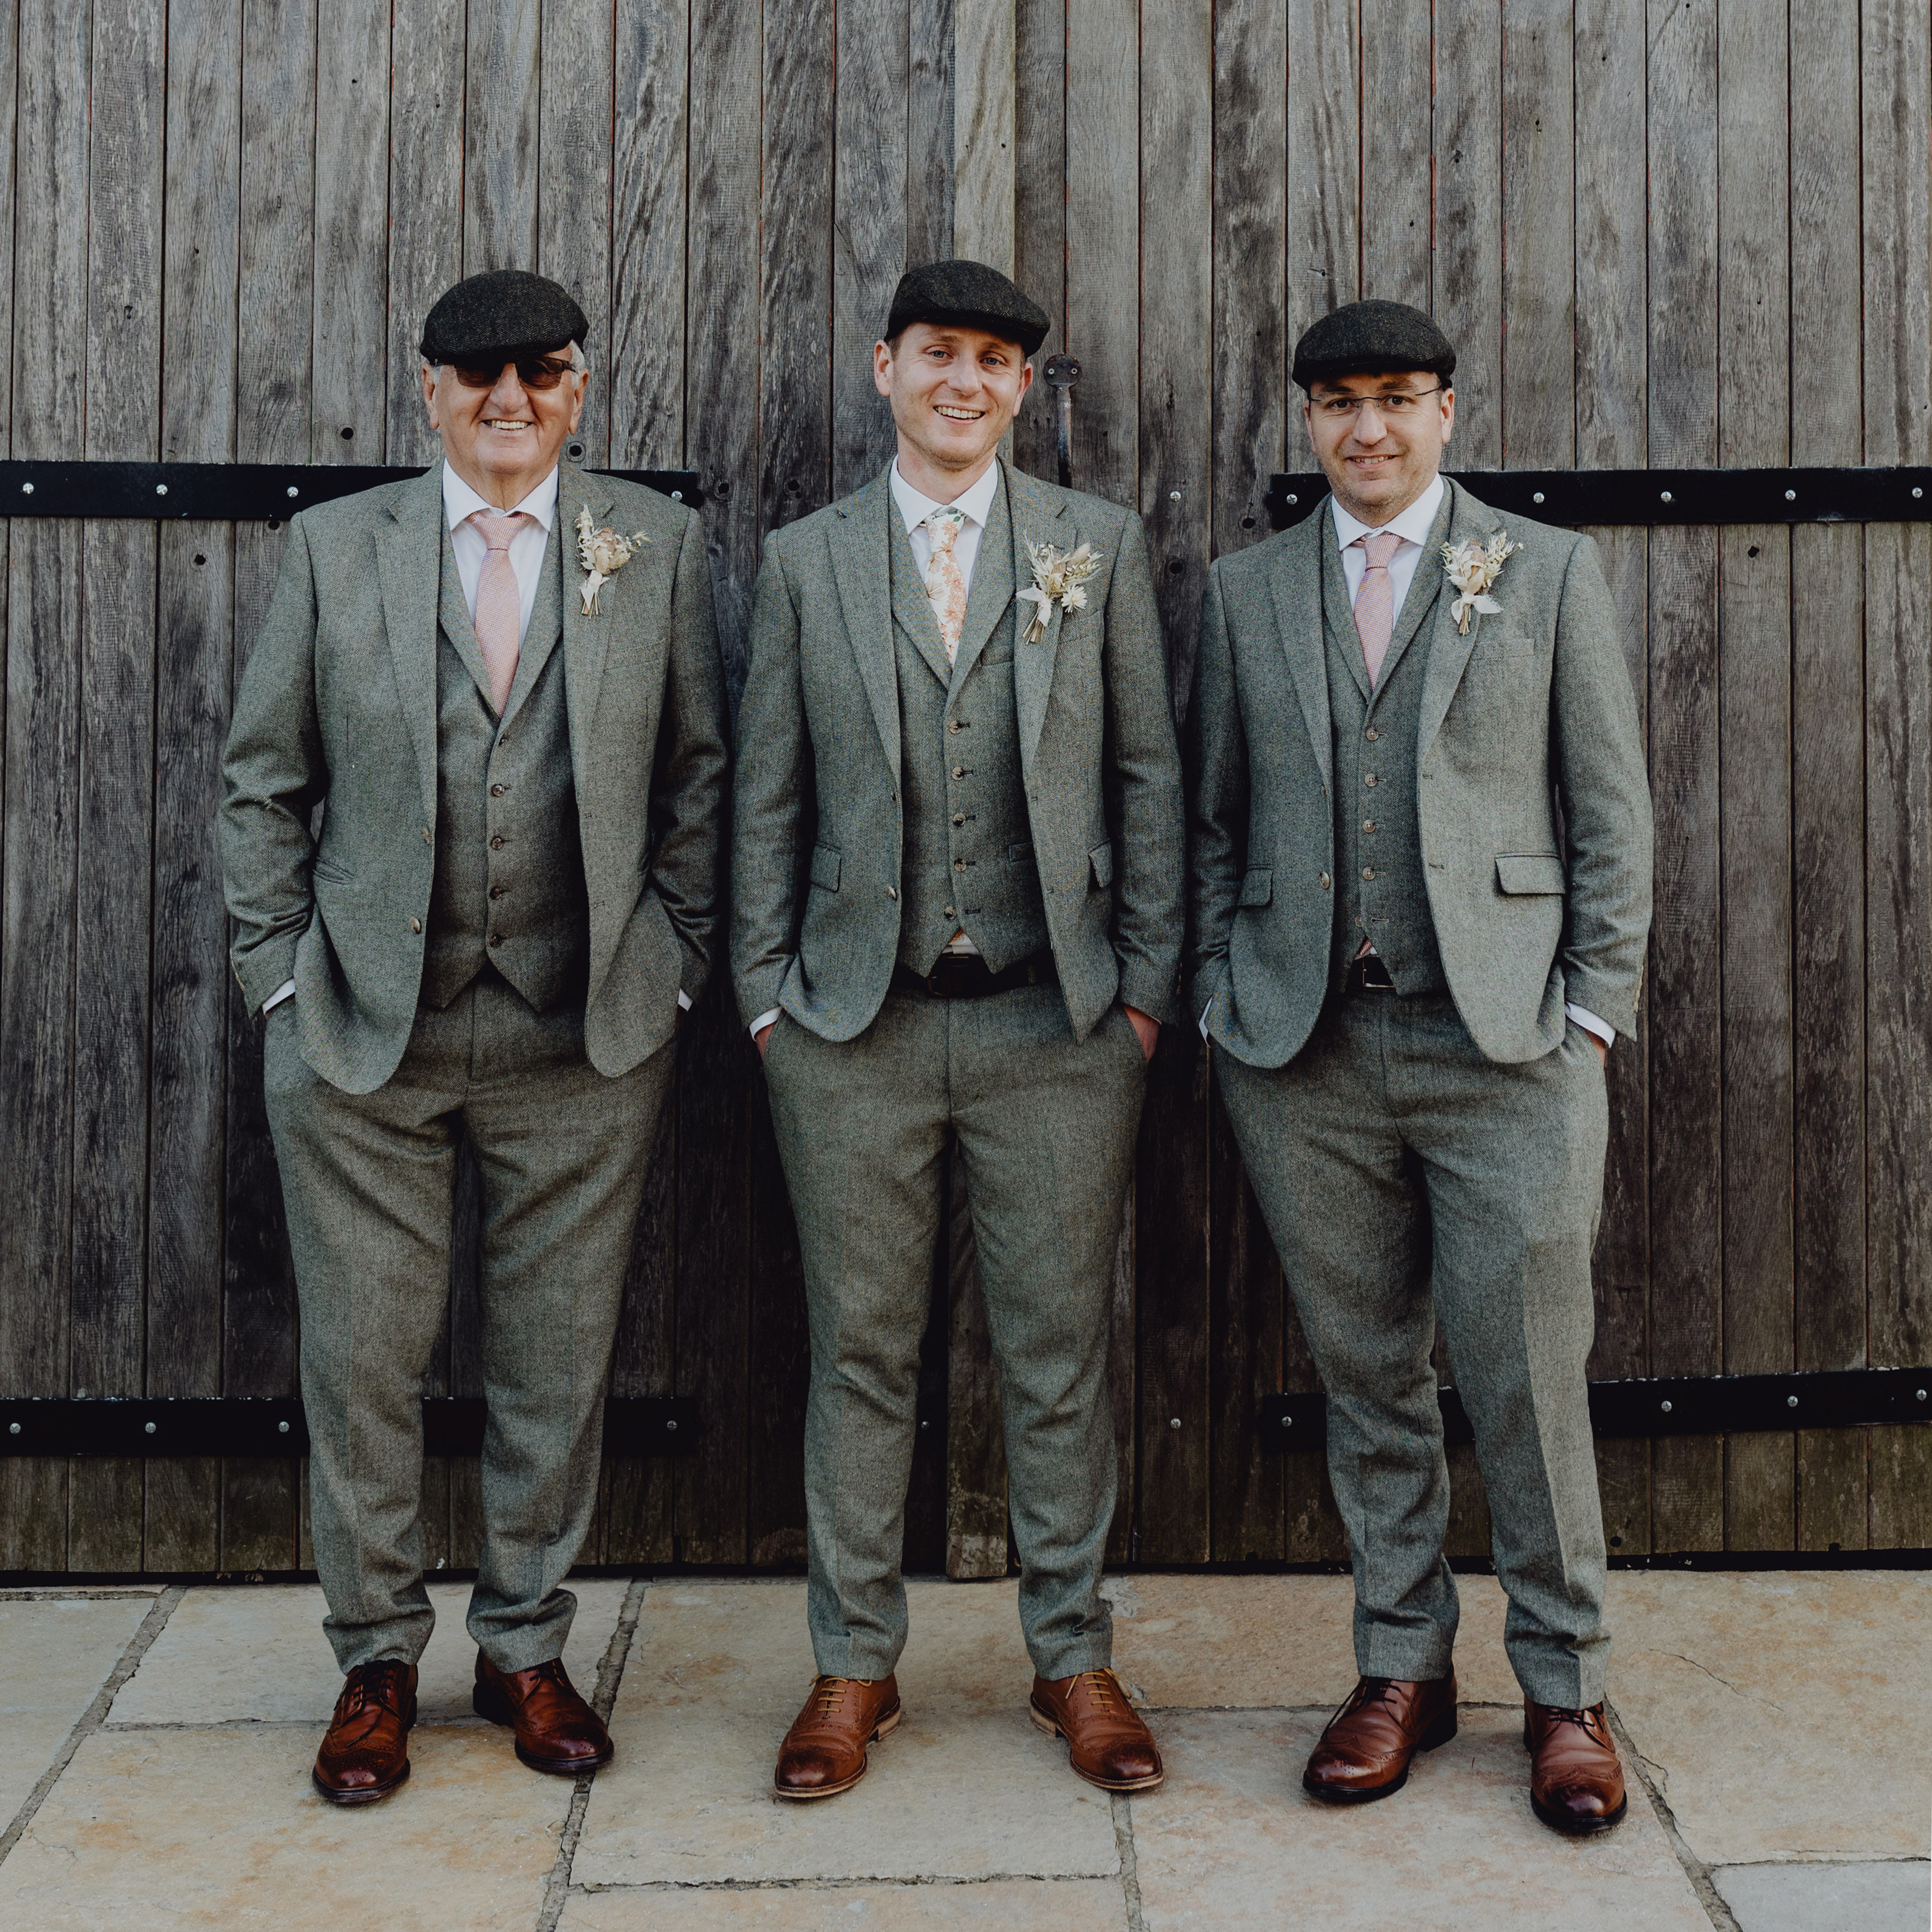 Three men dressed smartly in green tweed suits and flat caps stand in front of a wooden barn door, they are smiling.